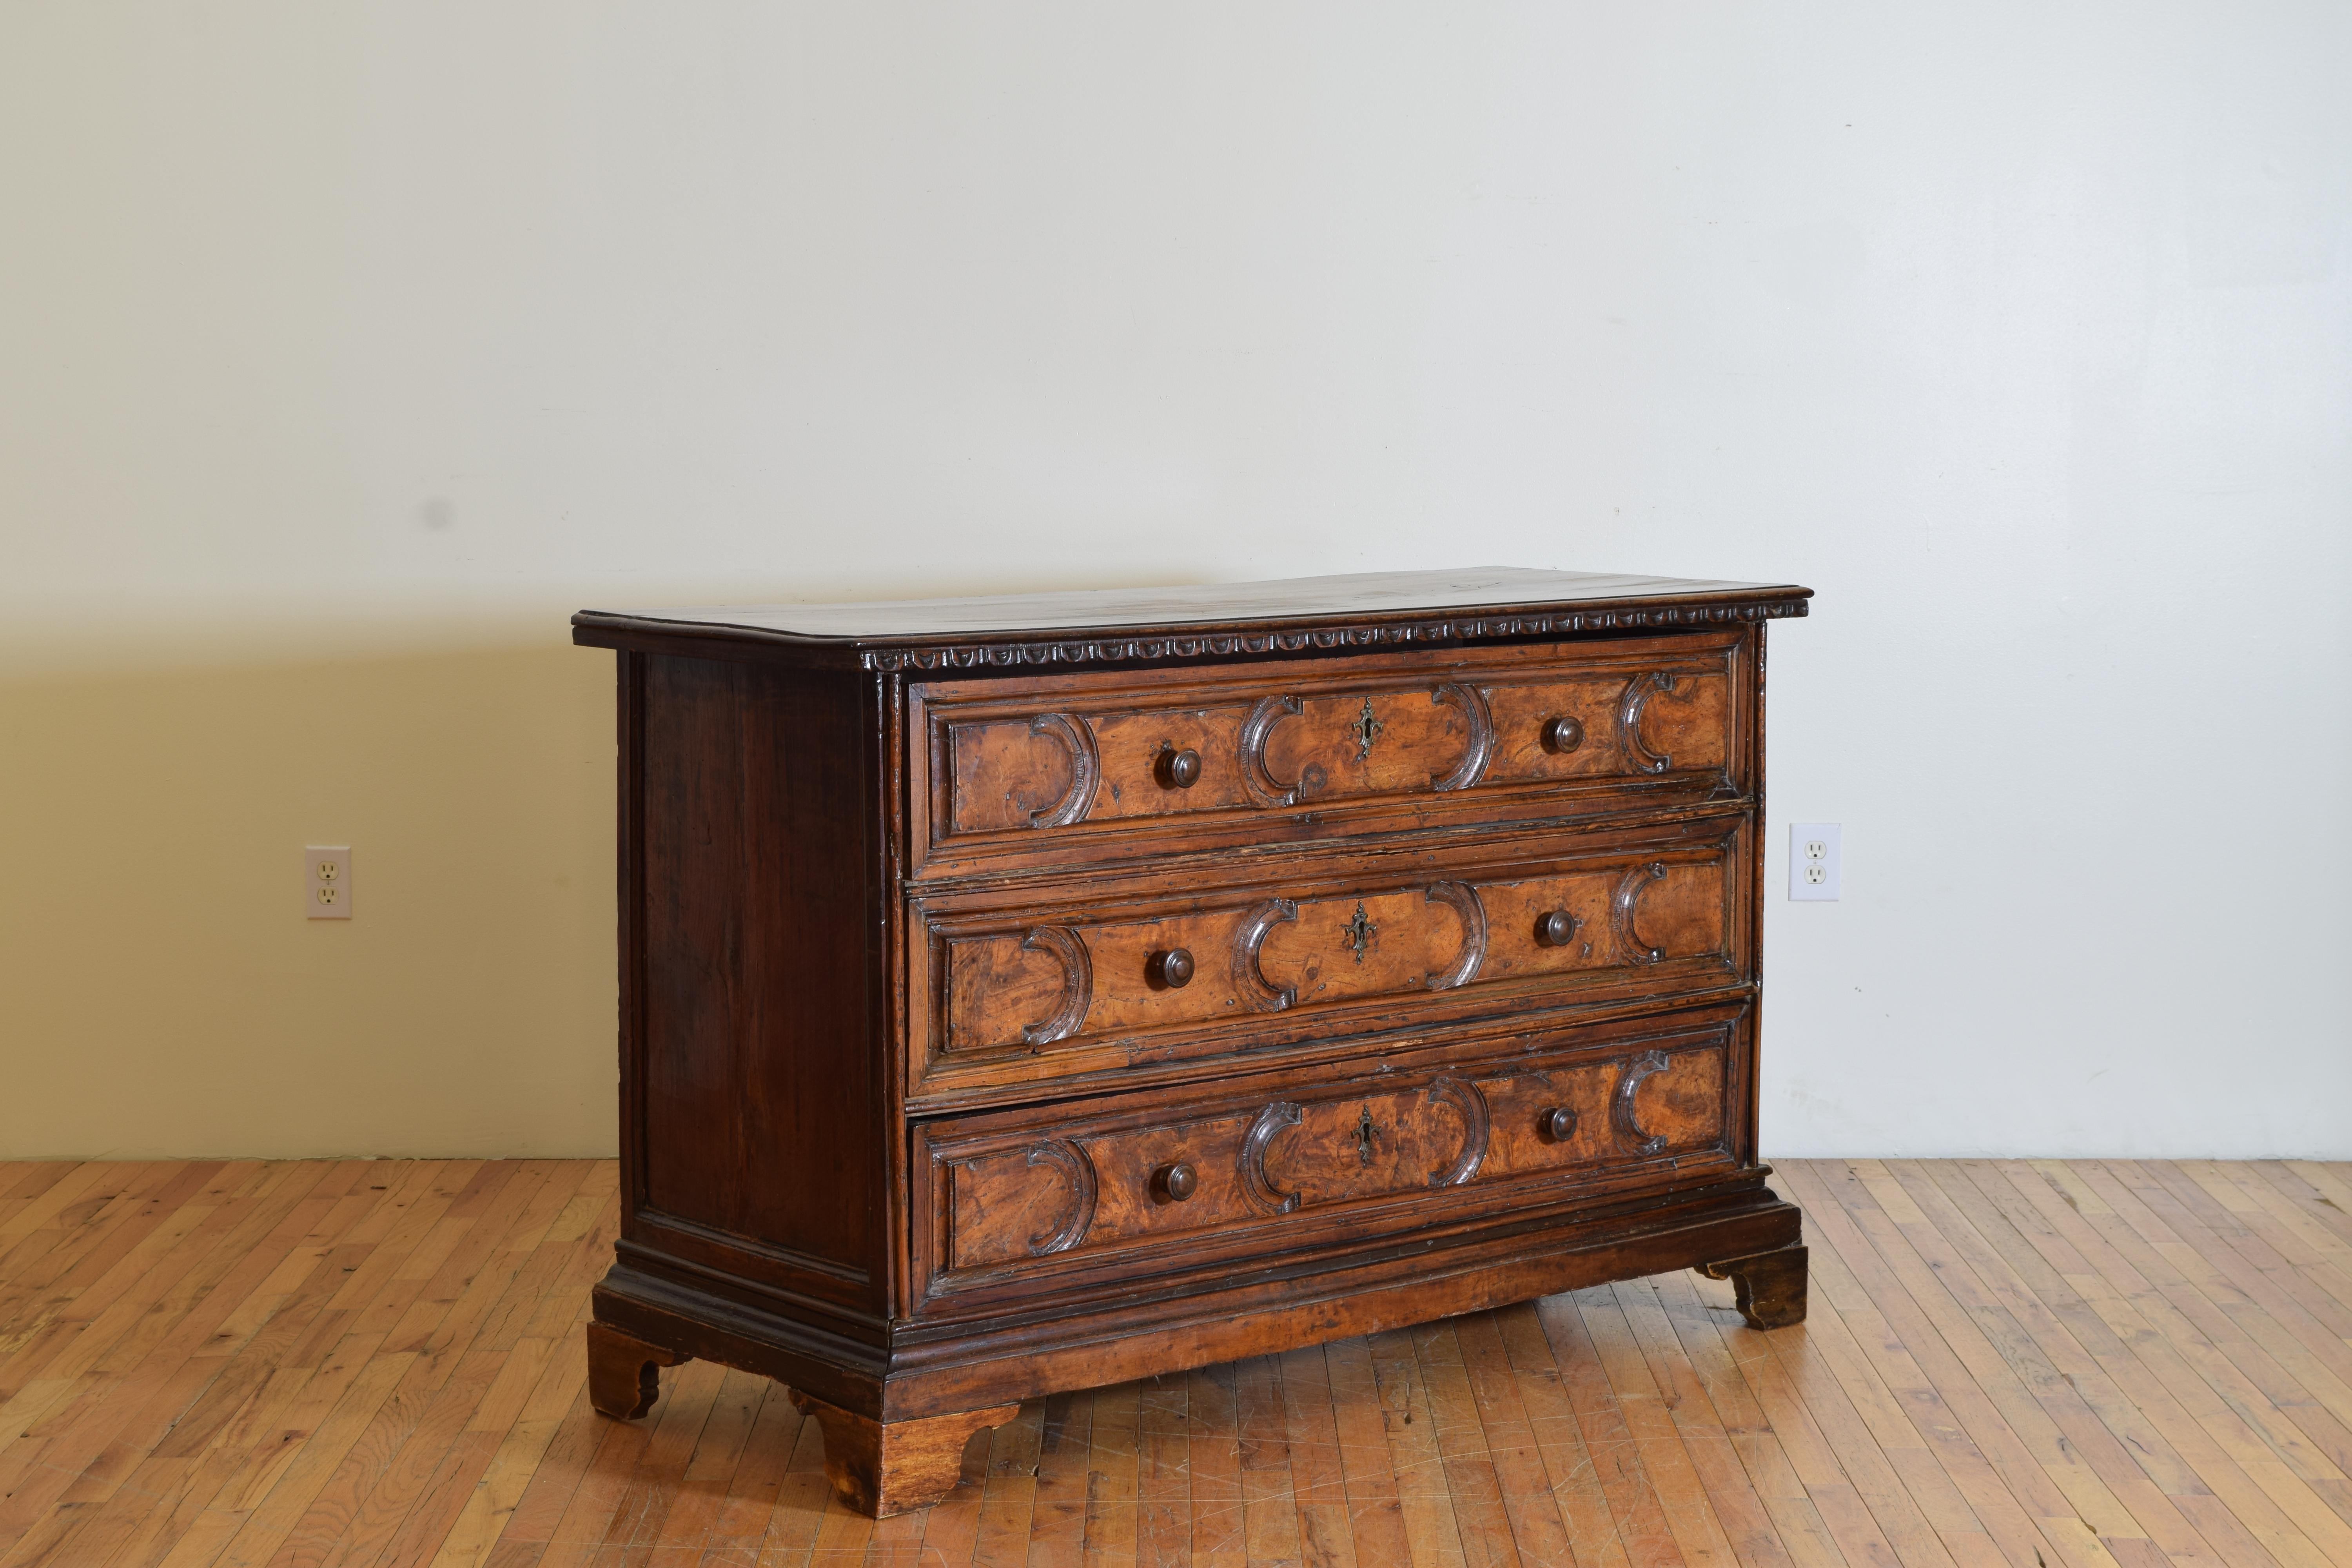 The rectangular top with a molded edge and dentile molding overhanging, the conforming case housing three carved and paneled drawers with original wooden pulls, the sides with raised molded edges, raised on carved bracket feet